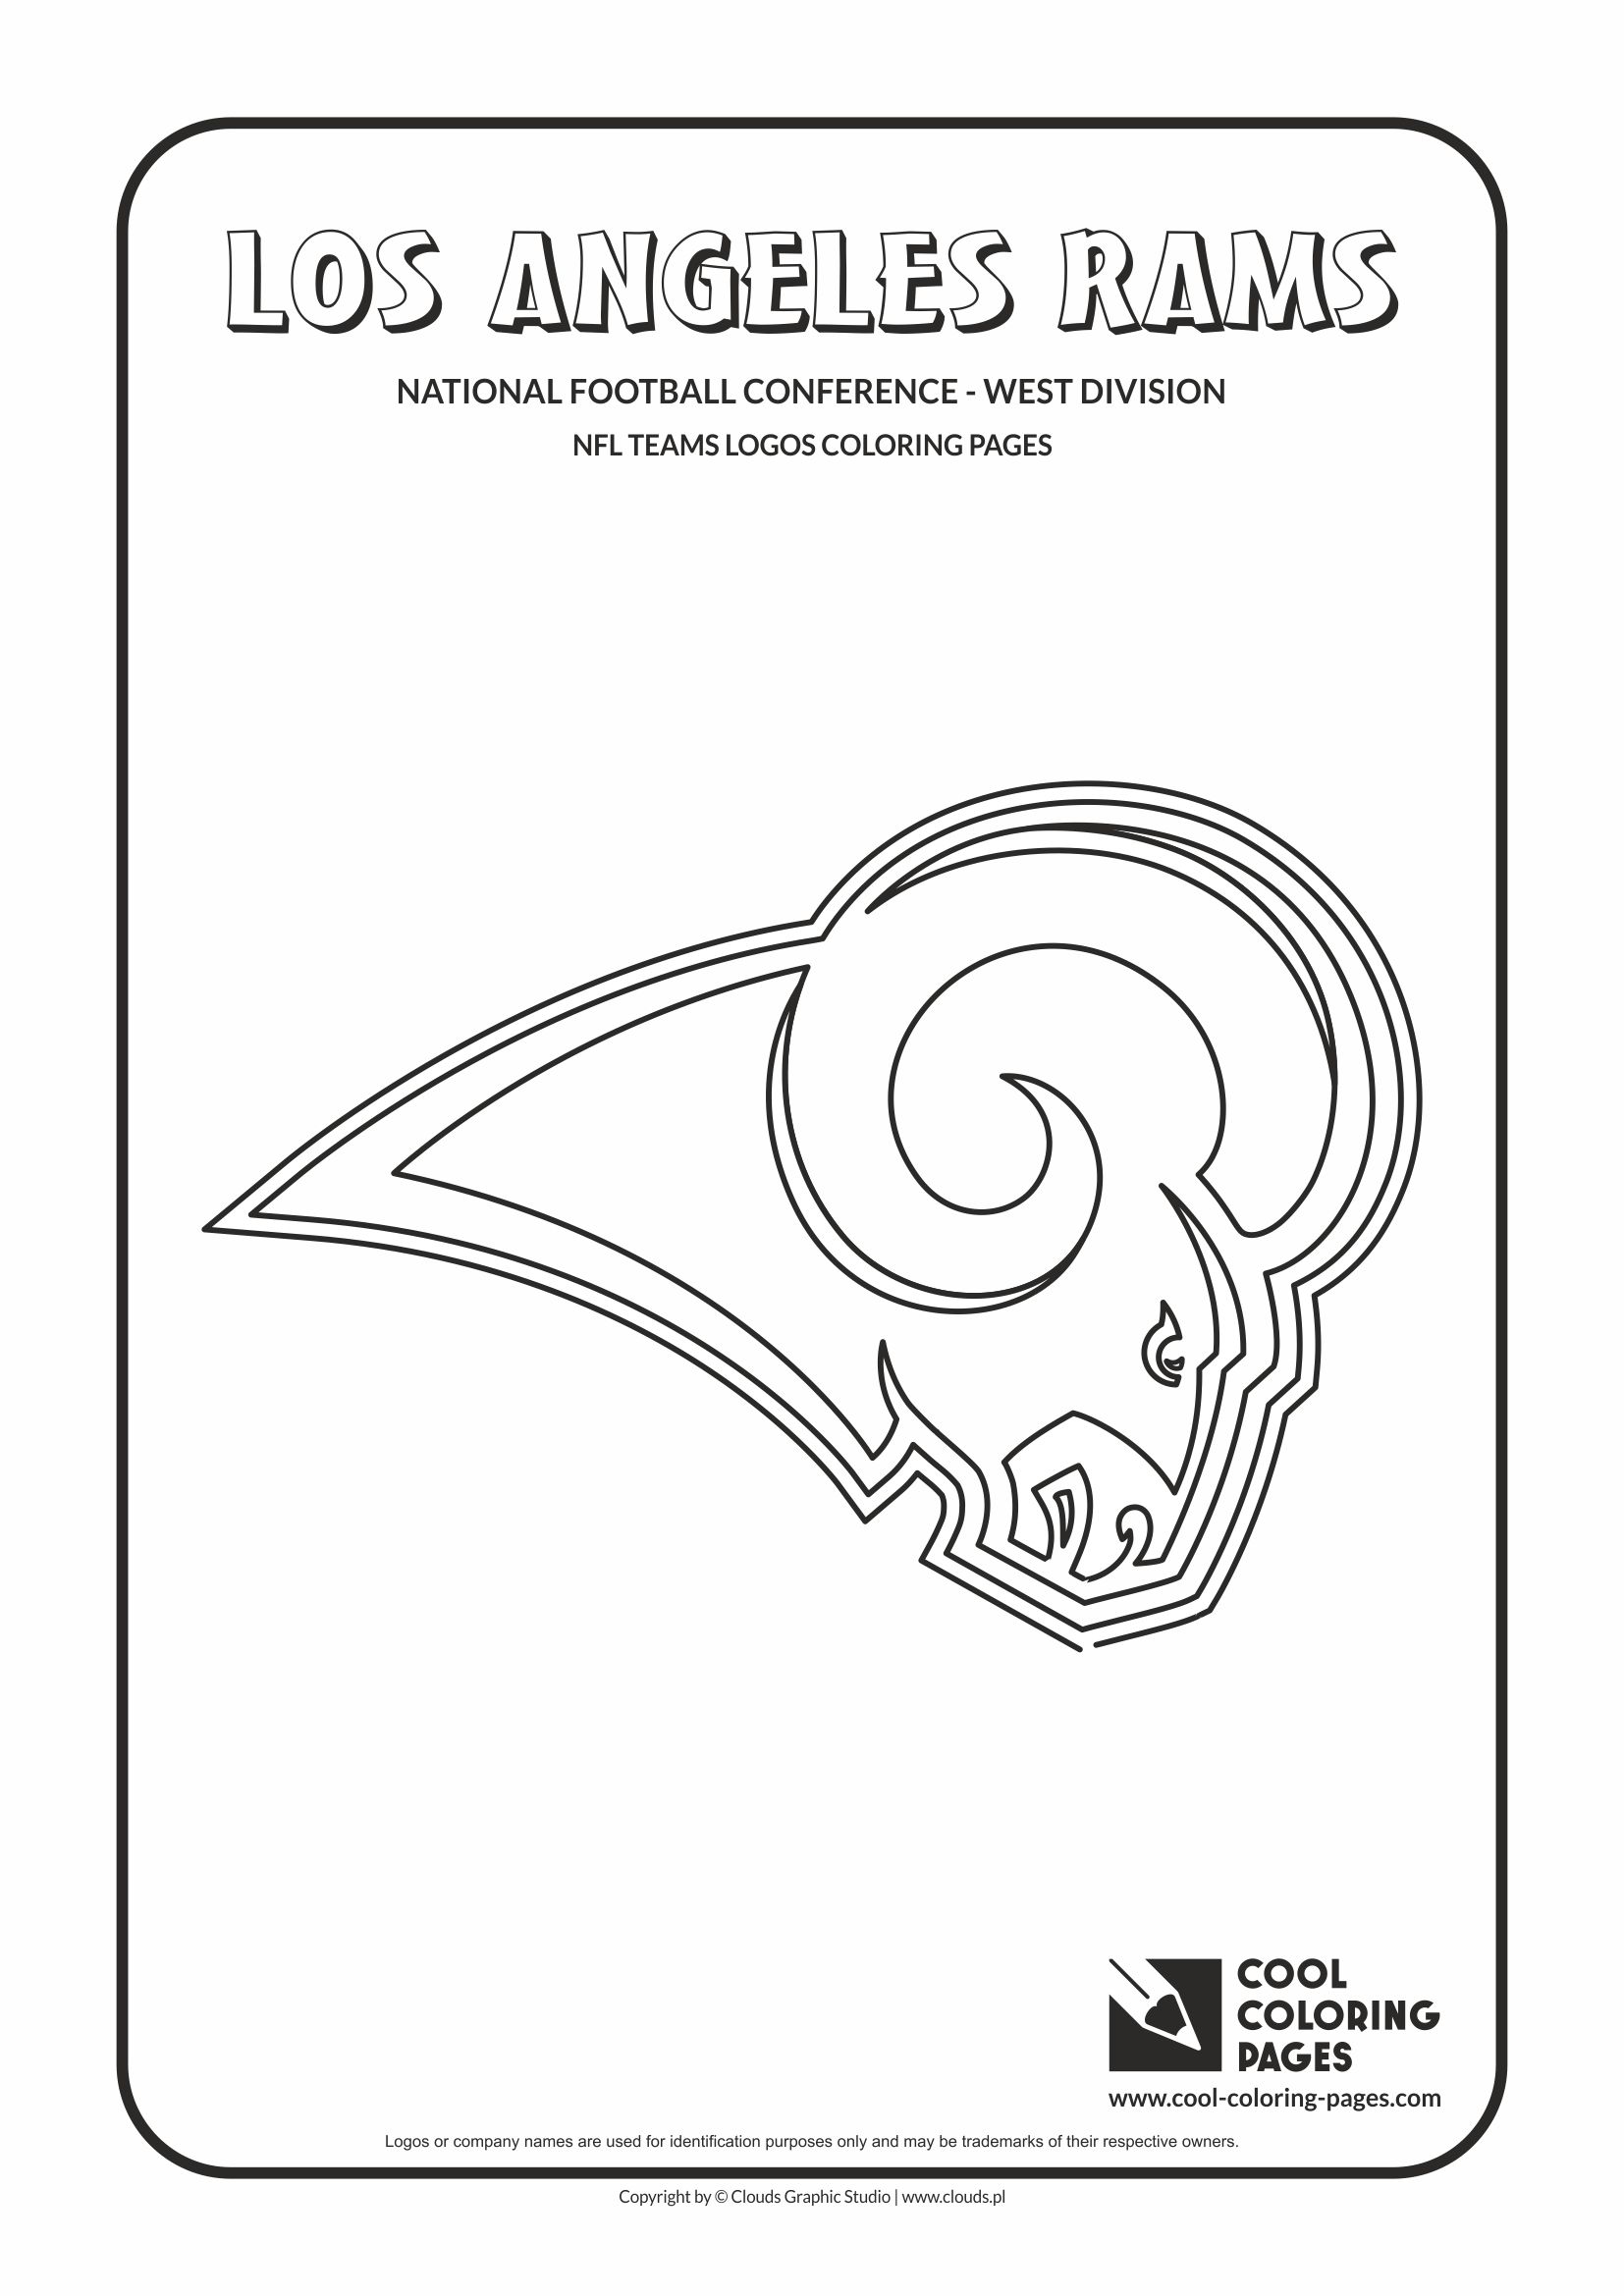 Cool Coloring Pages Los Angeles Rams - NFL American football teams